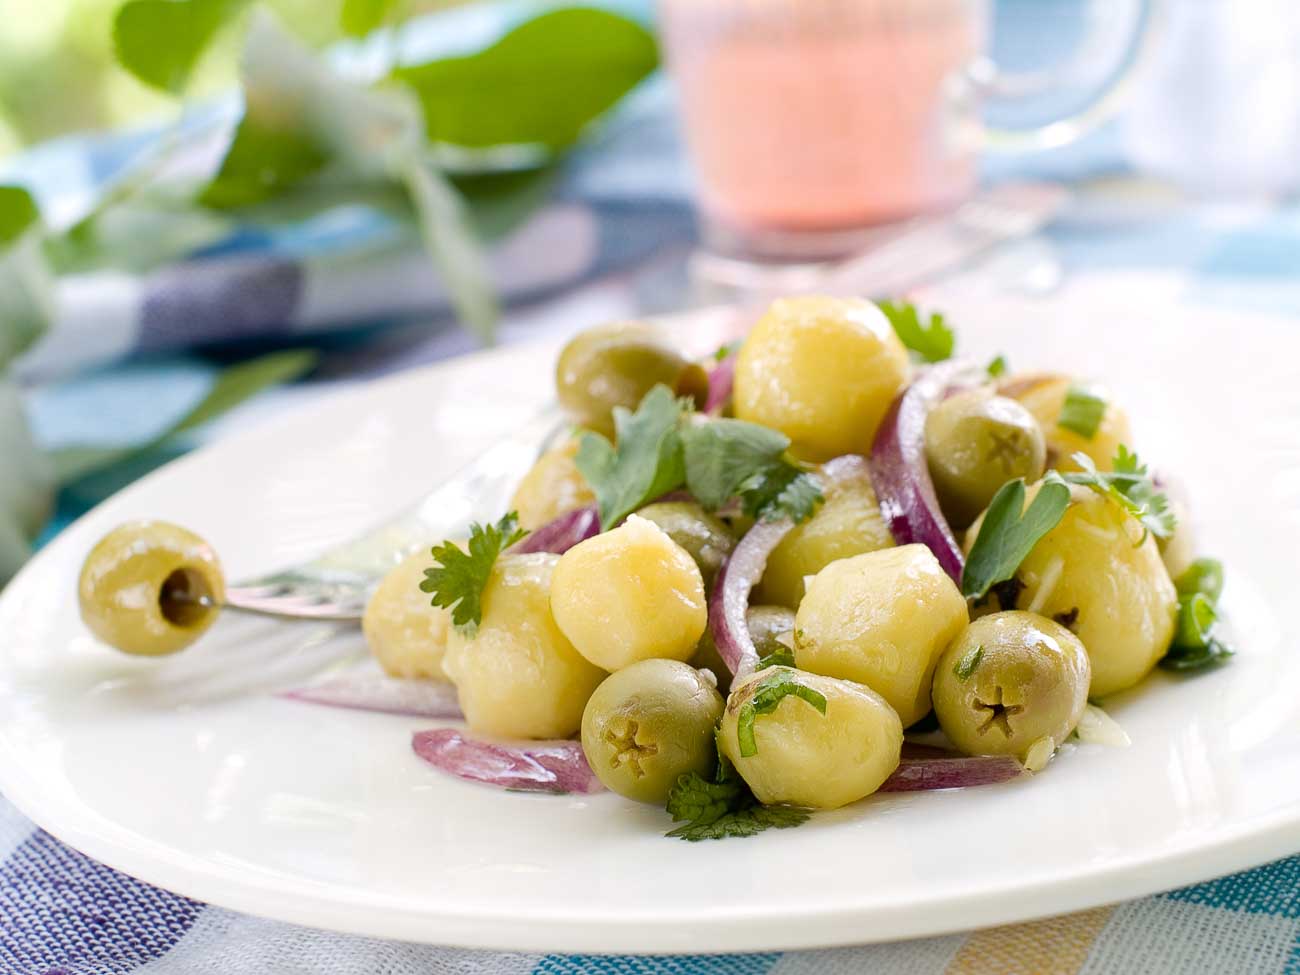 Herbed Potato And Green Olive Salad Recipe - A Delicious Summertime Salad